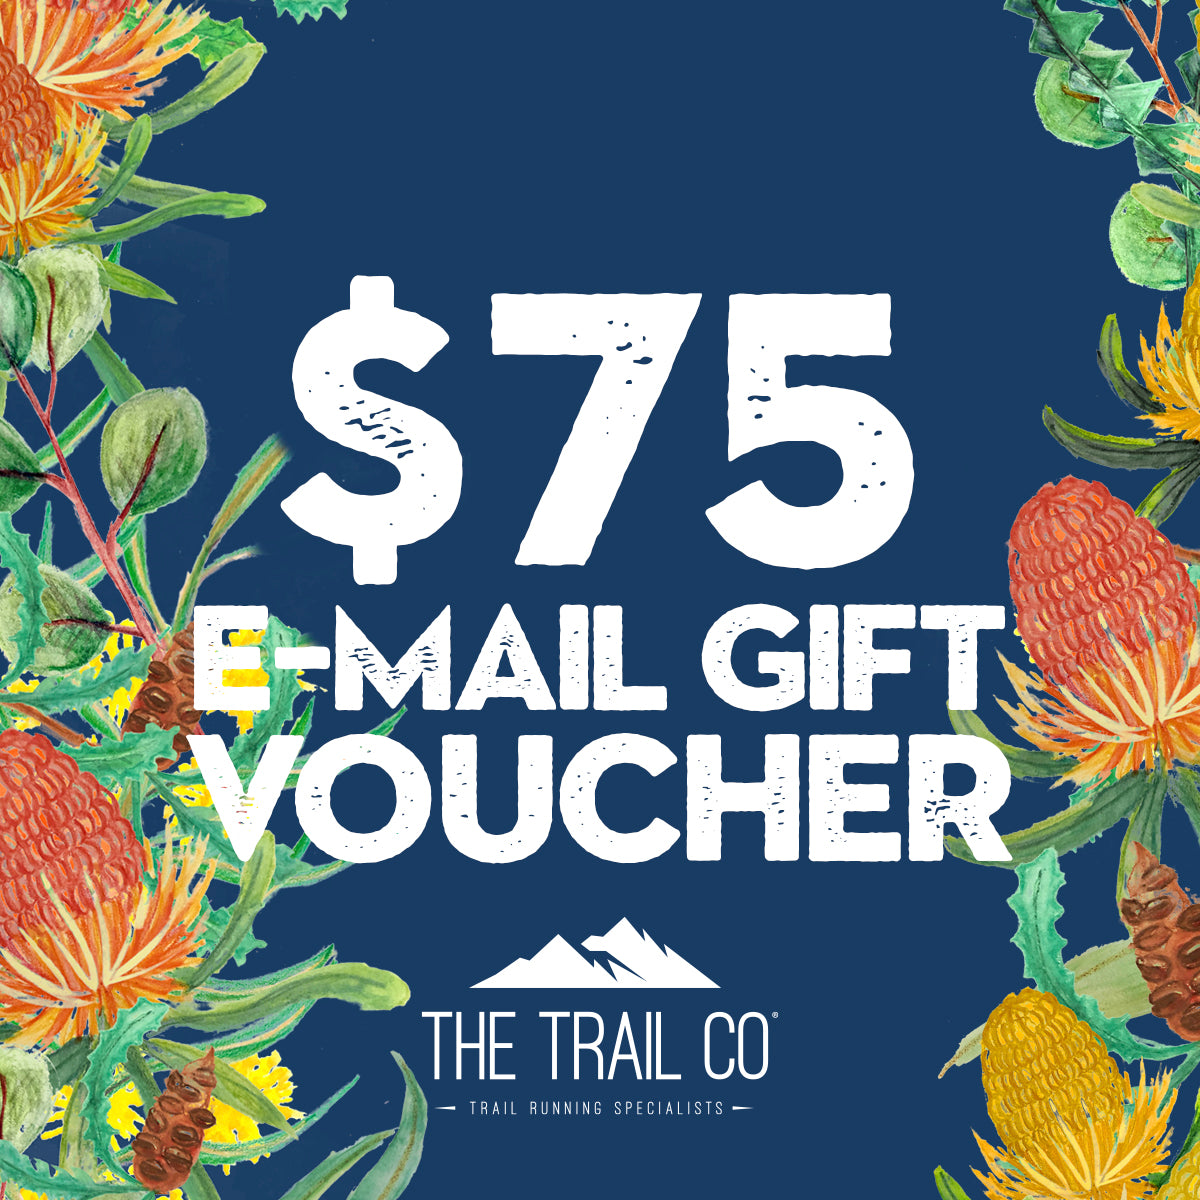 The Trail Co. Online Gift Voucher